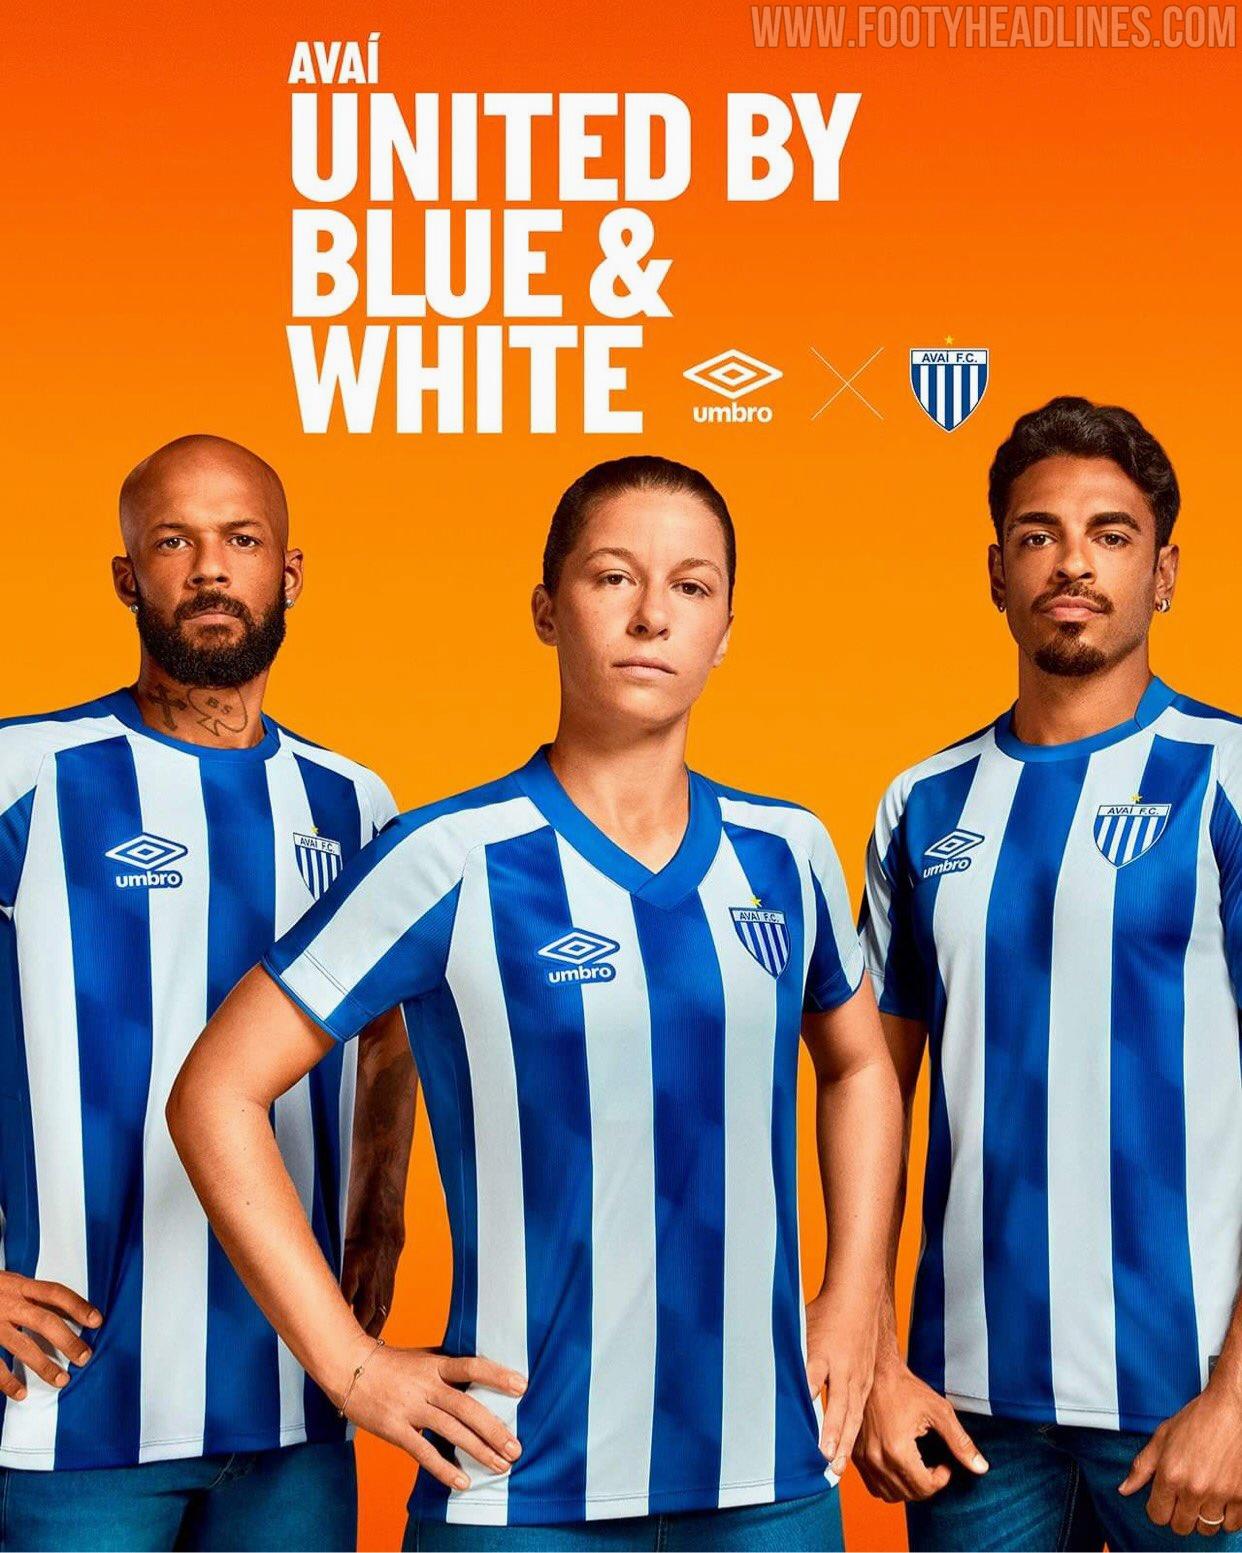 Avaí Fc 21 22 Home And Away Kits Released Footy Headlines